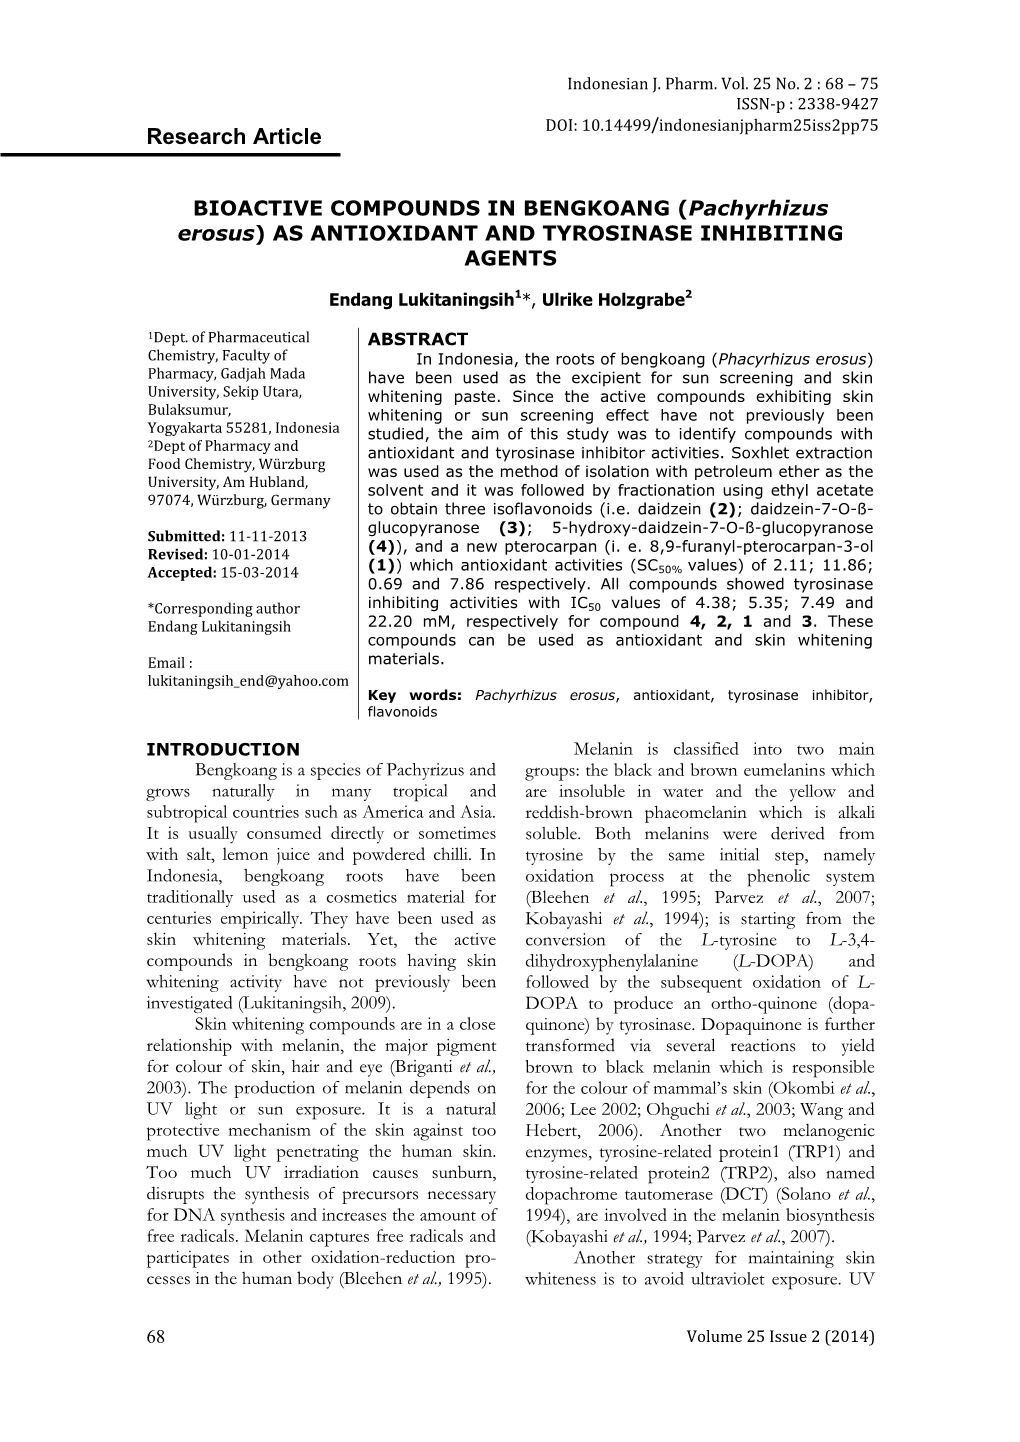 Bioactive Compounds in Bengkoang (Pachyrhizus Erosus ) As Antioxidant and Tyrosinase Inhibition Agents